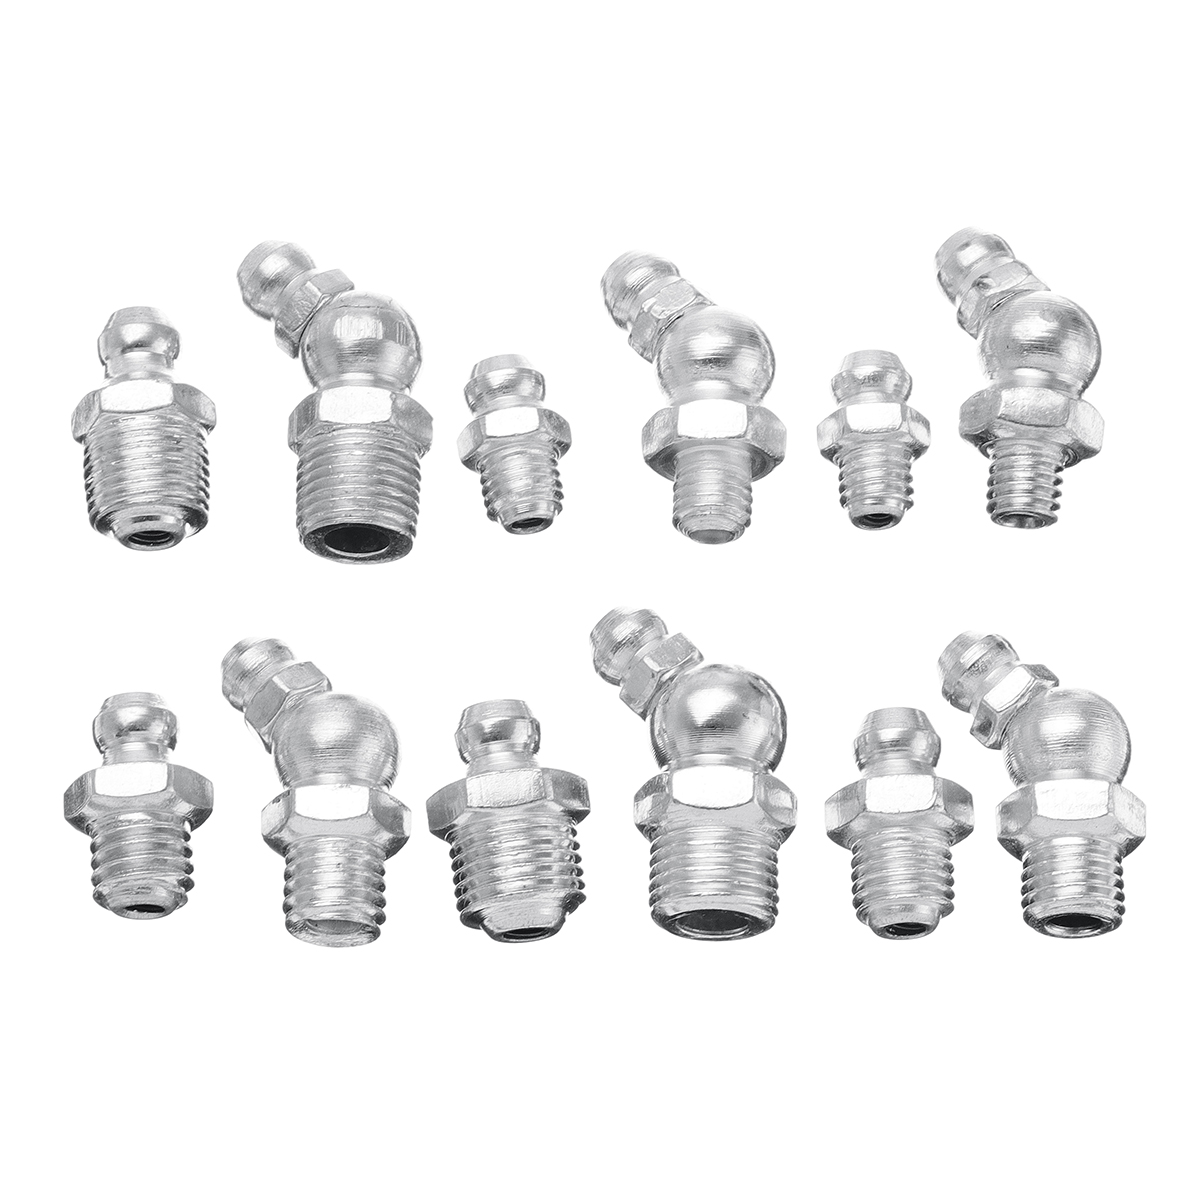 130pcs-Metric-Imperial-Fitting-BSP-UNF-M6-M8-M10-Assorted-Hydraulic-Grease-Nipples-Pipes-Fittings-1436097-3